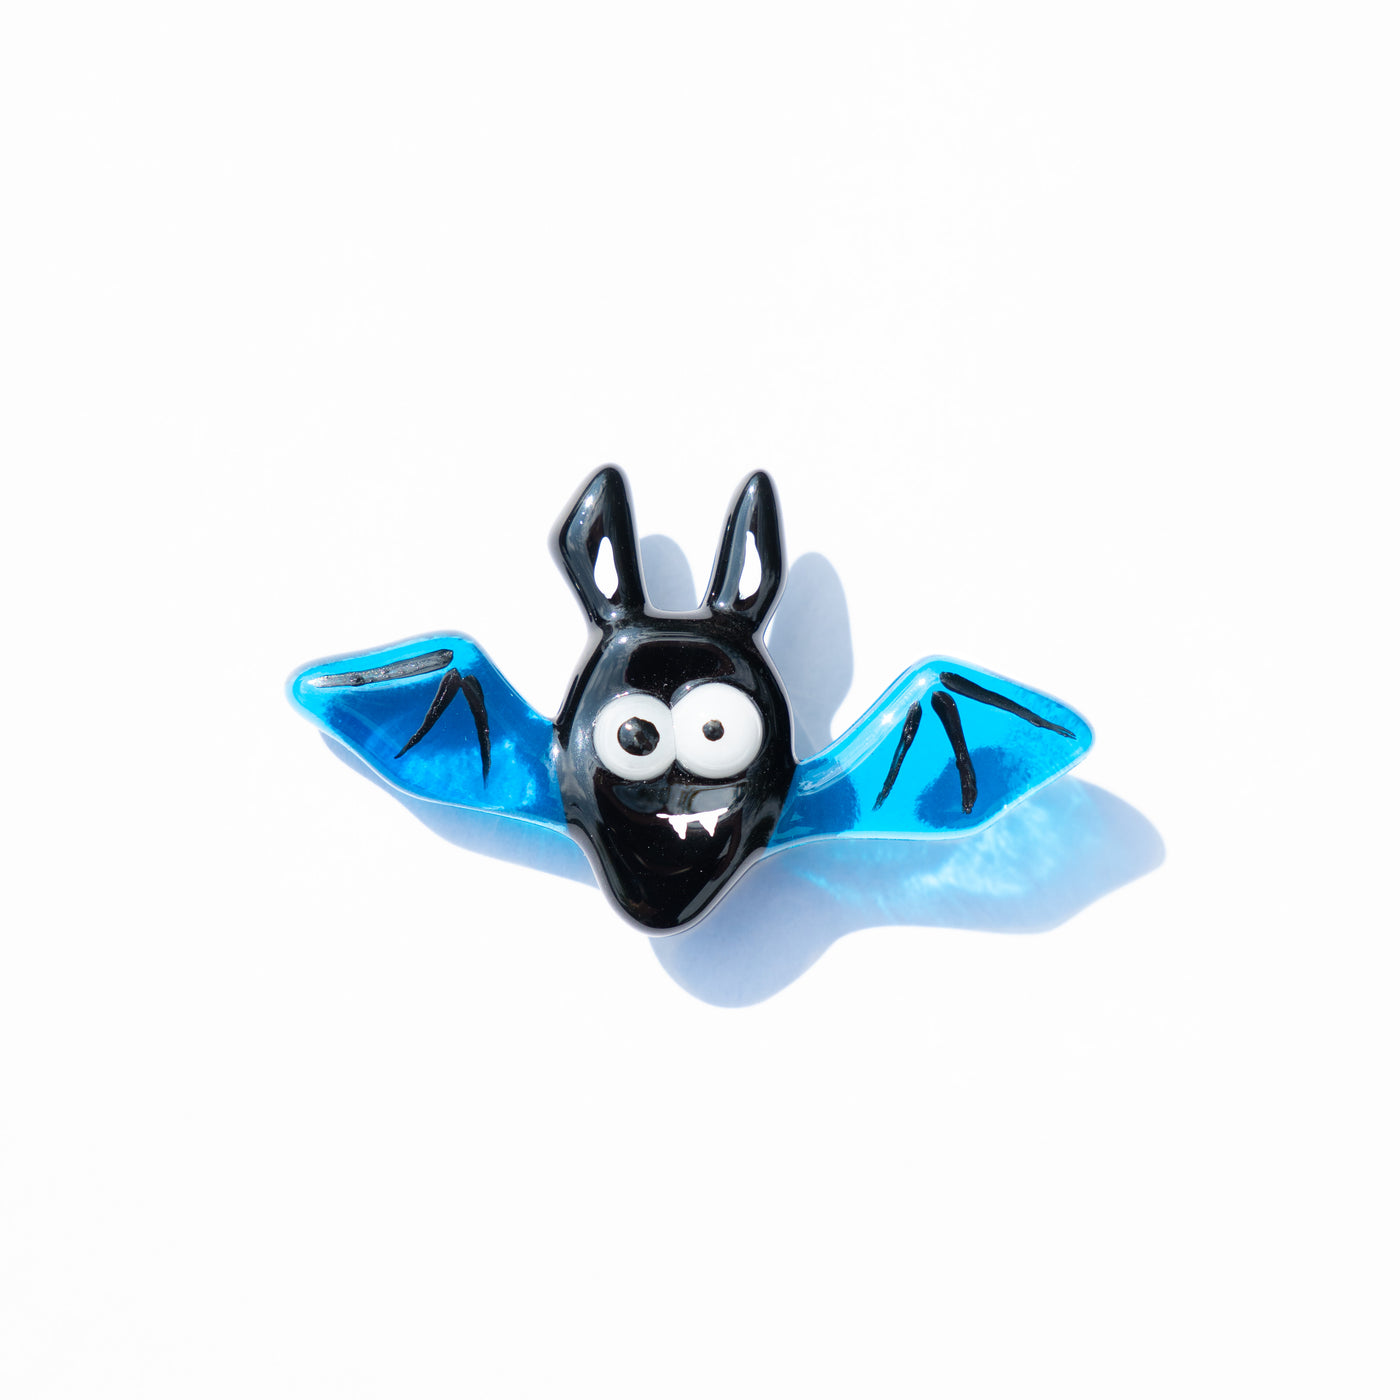 Halloween blue bat with funny face pin of stained glass